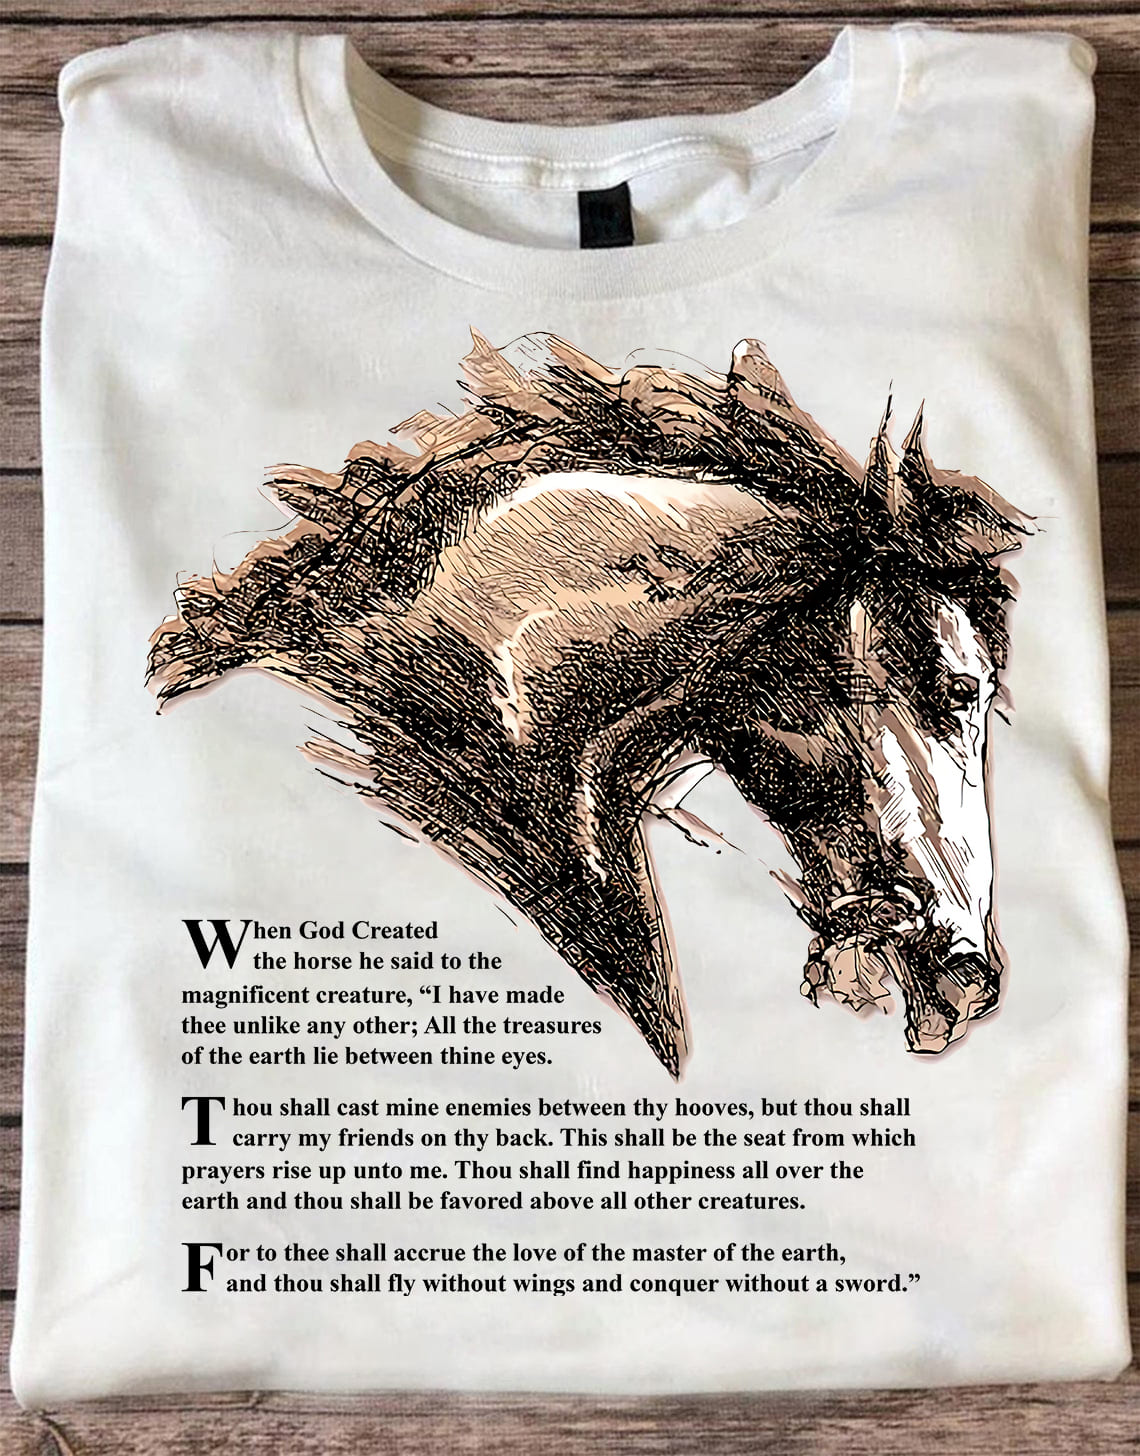 God created horses - Gift for horse lover, God and horse, believe in God